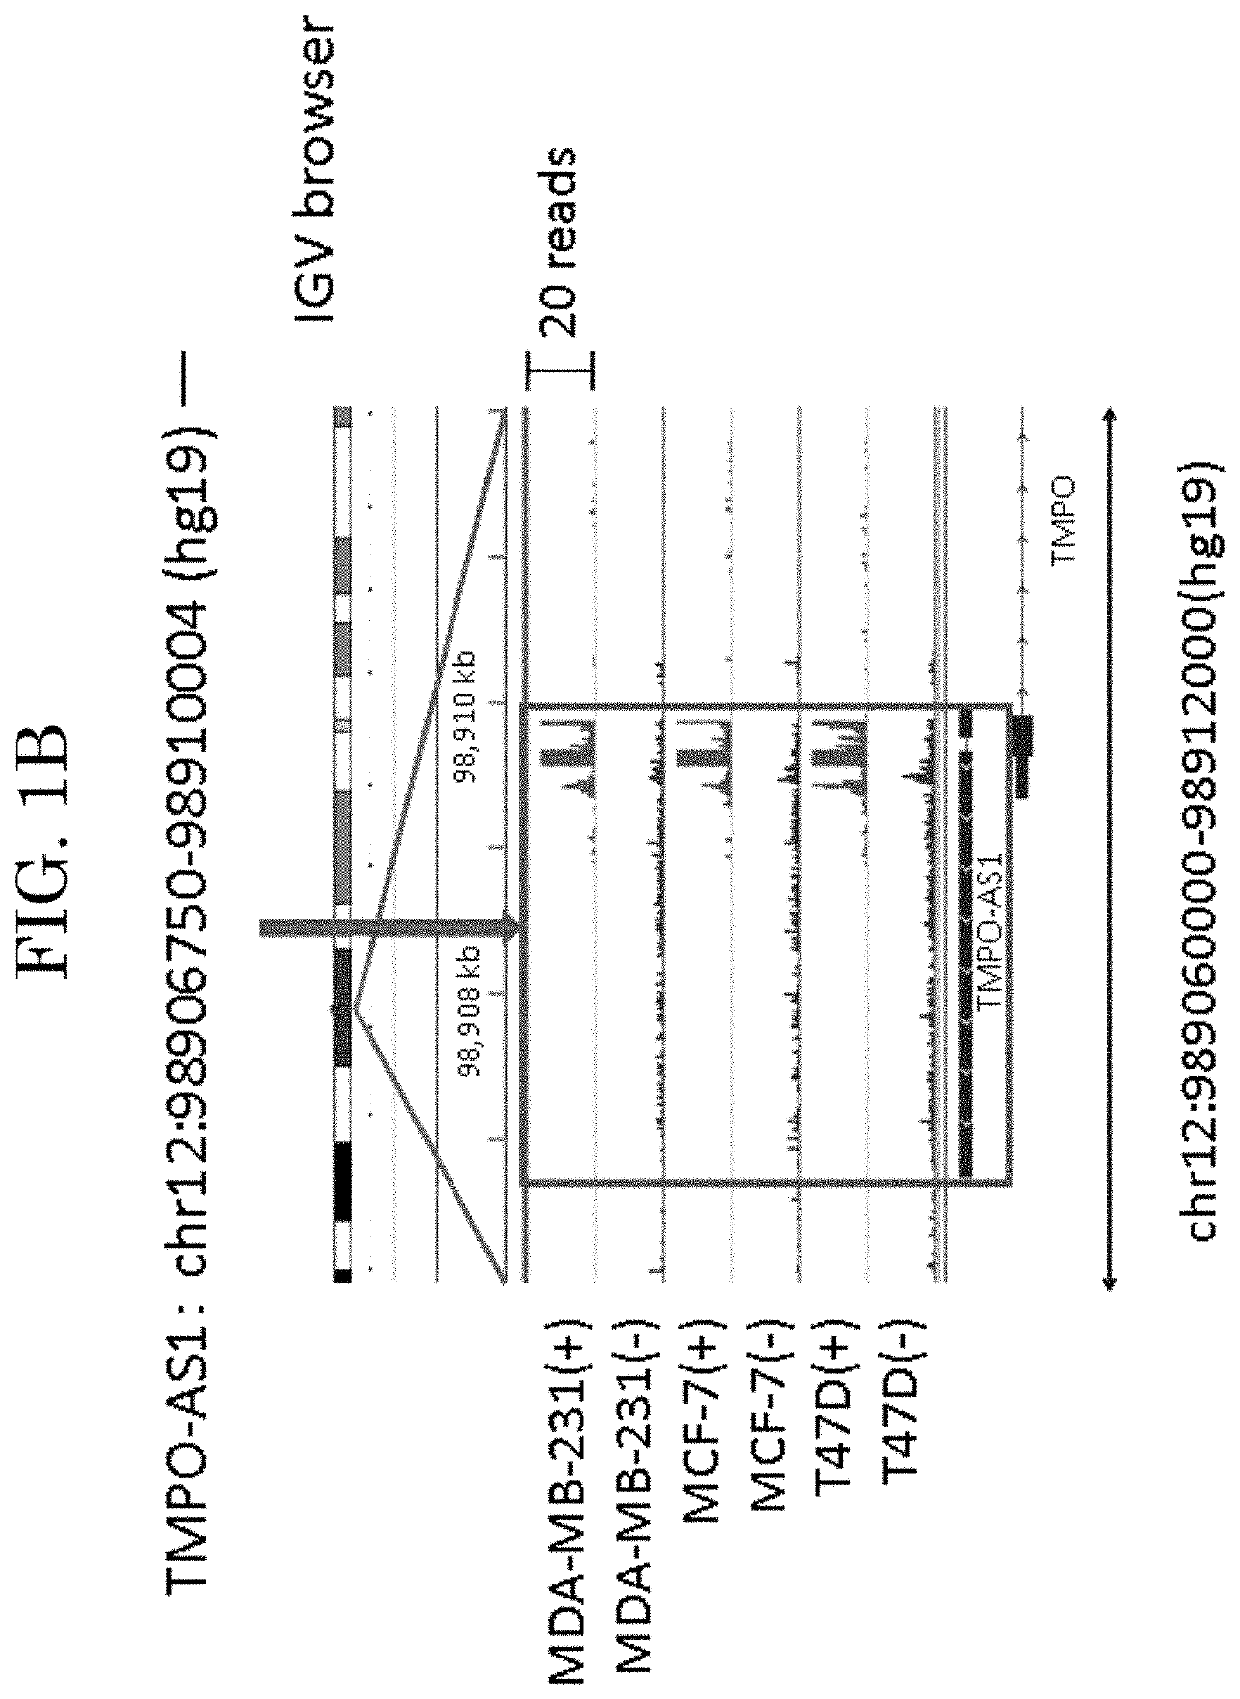 Double-stranded nucleic acid molecule, DNA, vector, cancer cell growth inhibitor, cancer cell migration inhibitor, and drug